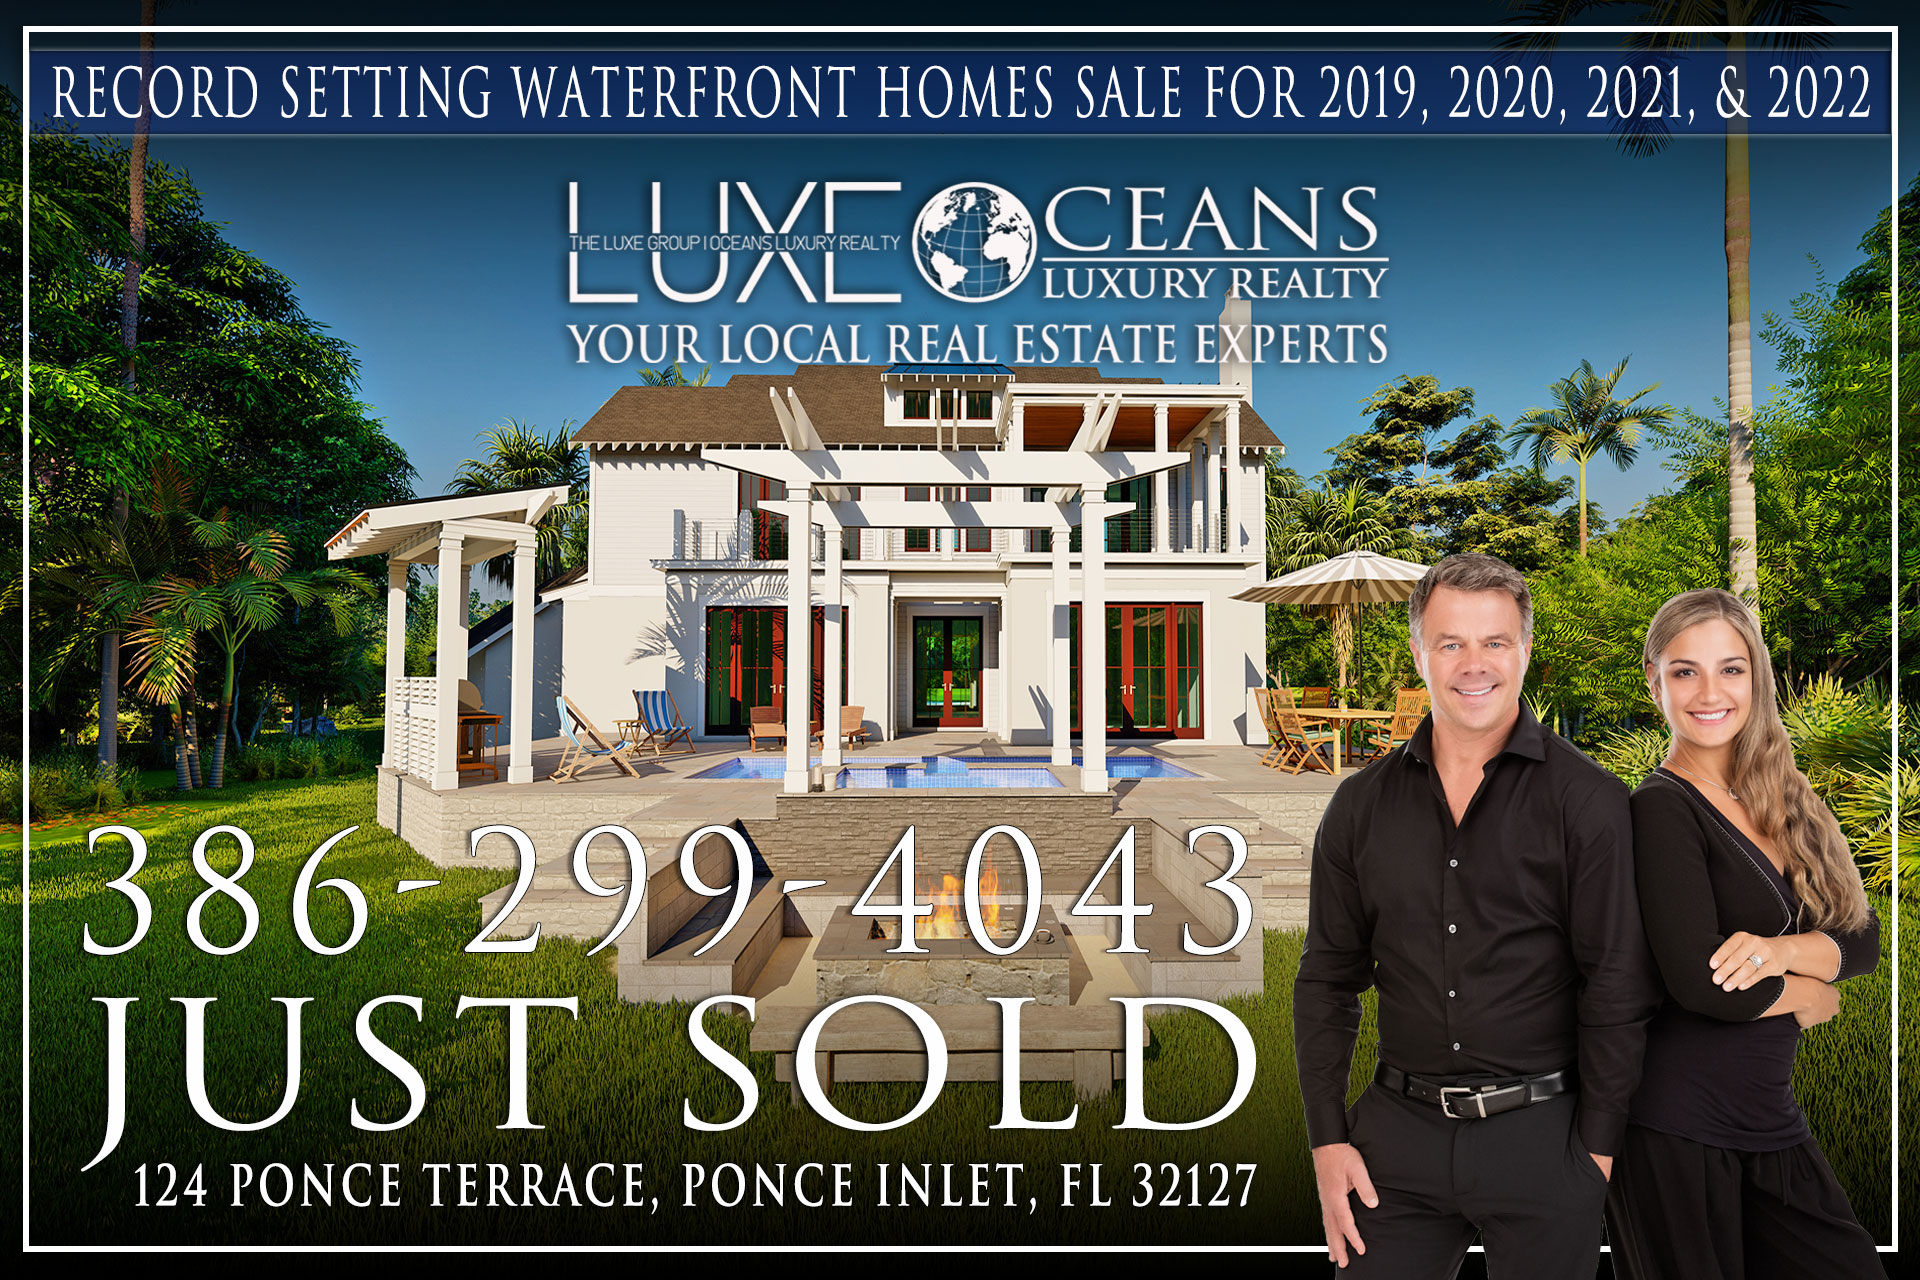 Ponce Inlet Luxury Real Estate For Sale. 124 Ponce Terrace Ponce Inlet Florida Just Sold. The LUXE Group at Oceans Luxury Realty 386-299-4043